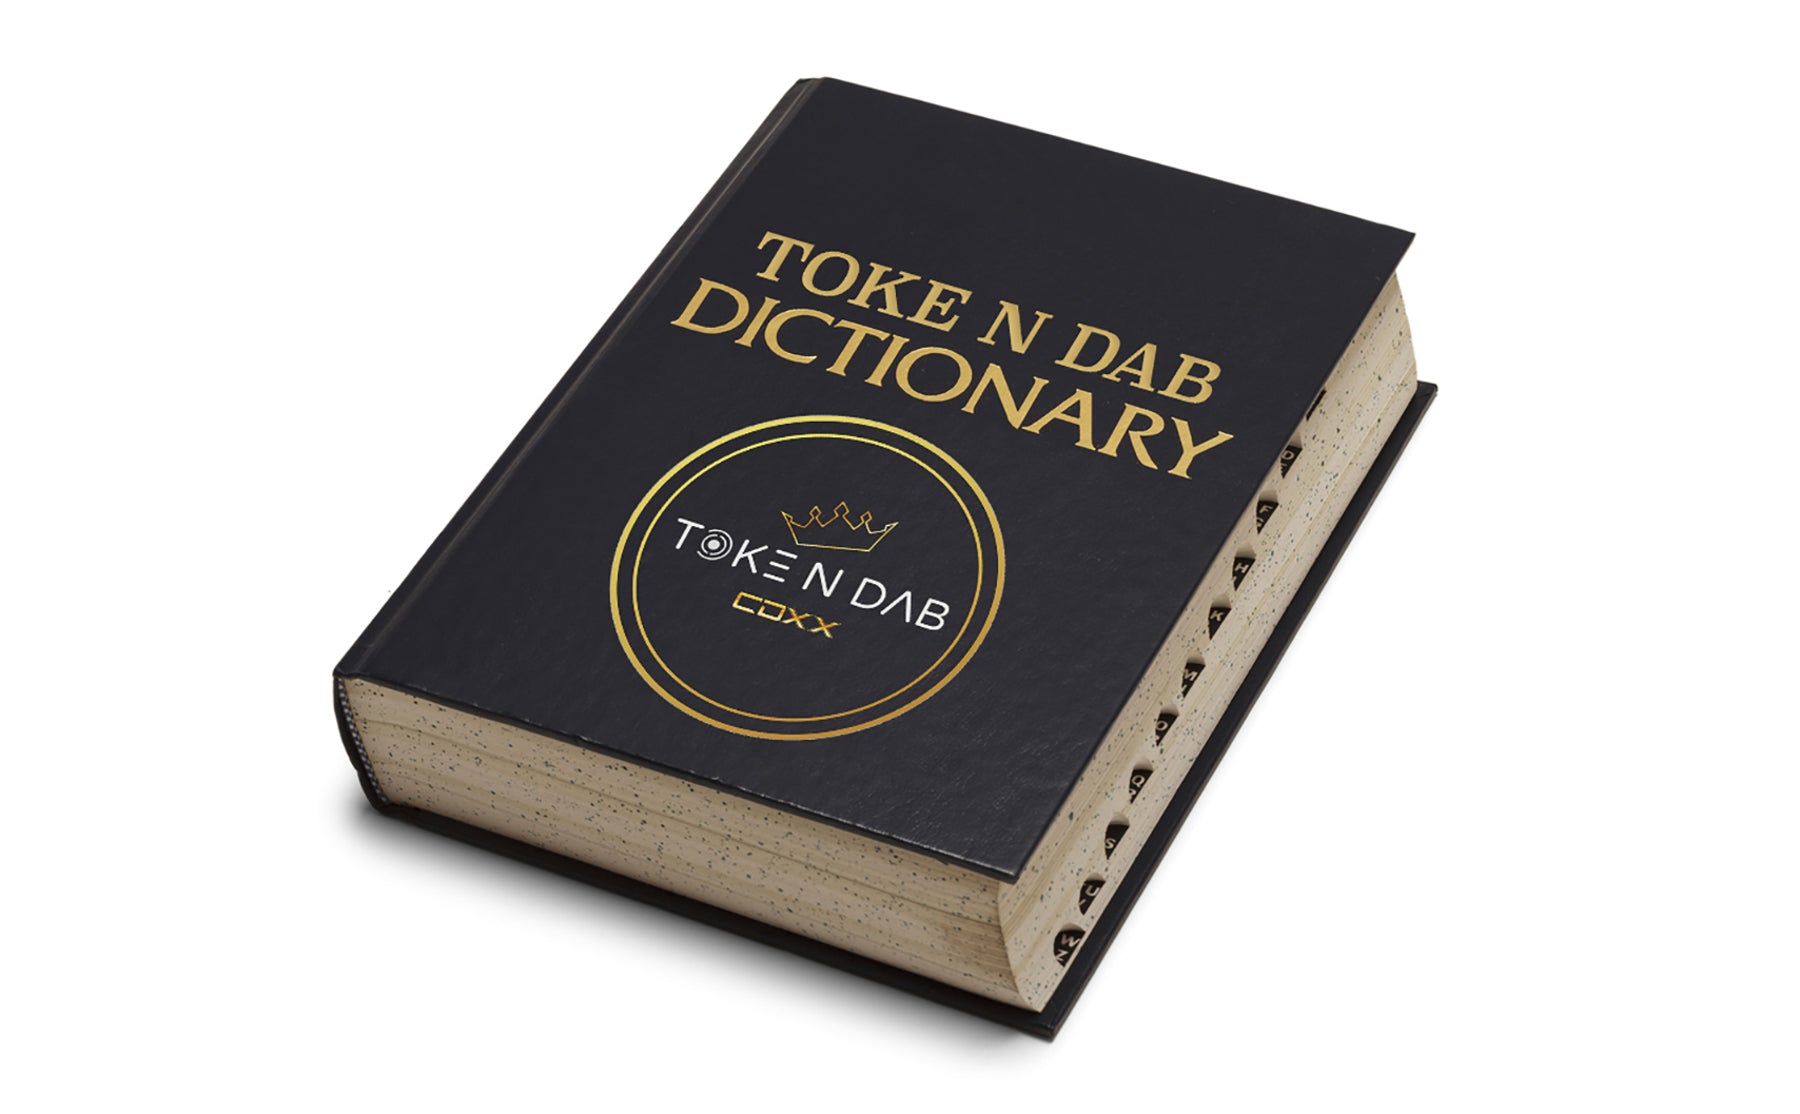 The Toke N Dab Dictionary